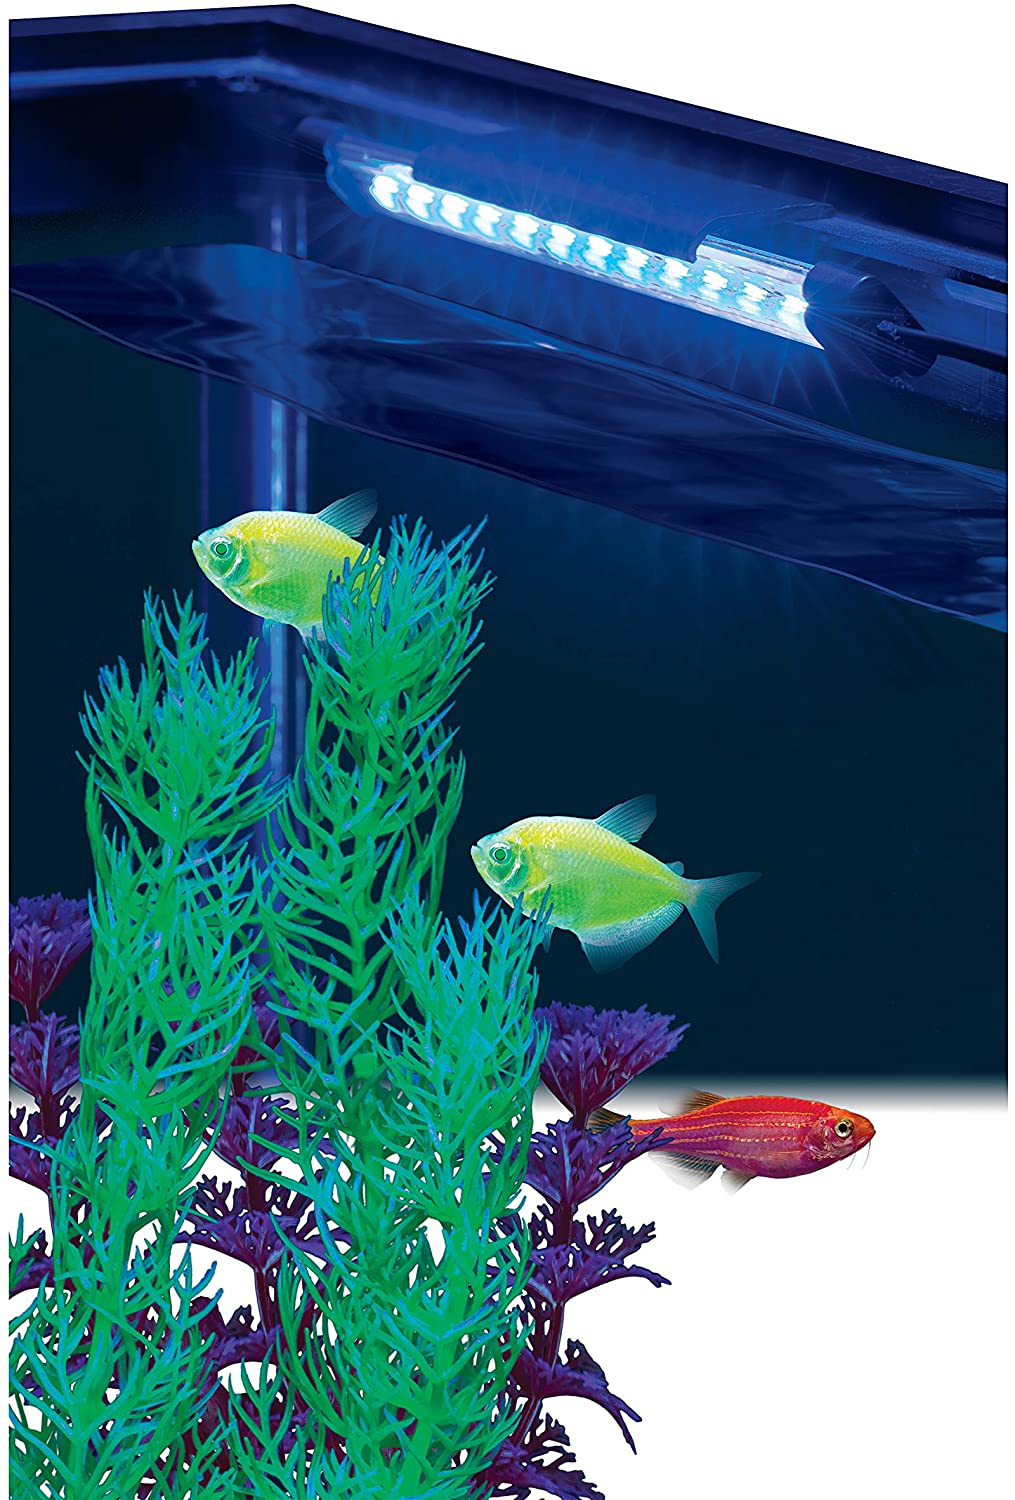 Glofish Blue LED Light 6 Inch, for Aquariums up to 10 Gallons Animals & Pet Supplies > Pet Supplies > Fish Supplies > Aquarium Lighting GloFish   